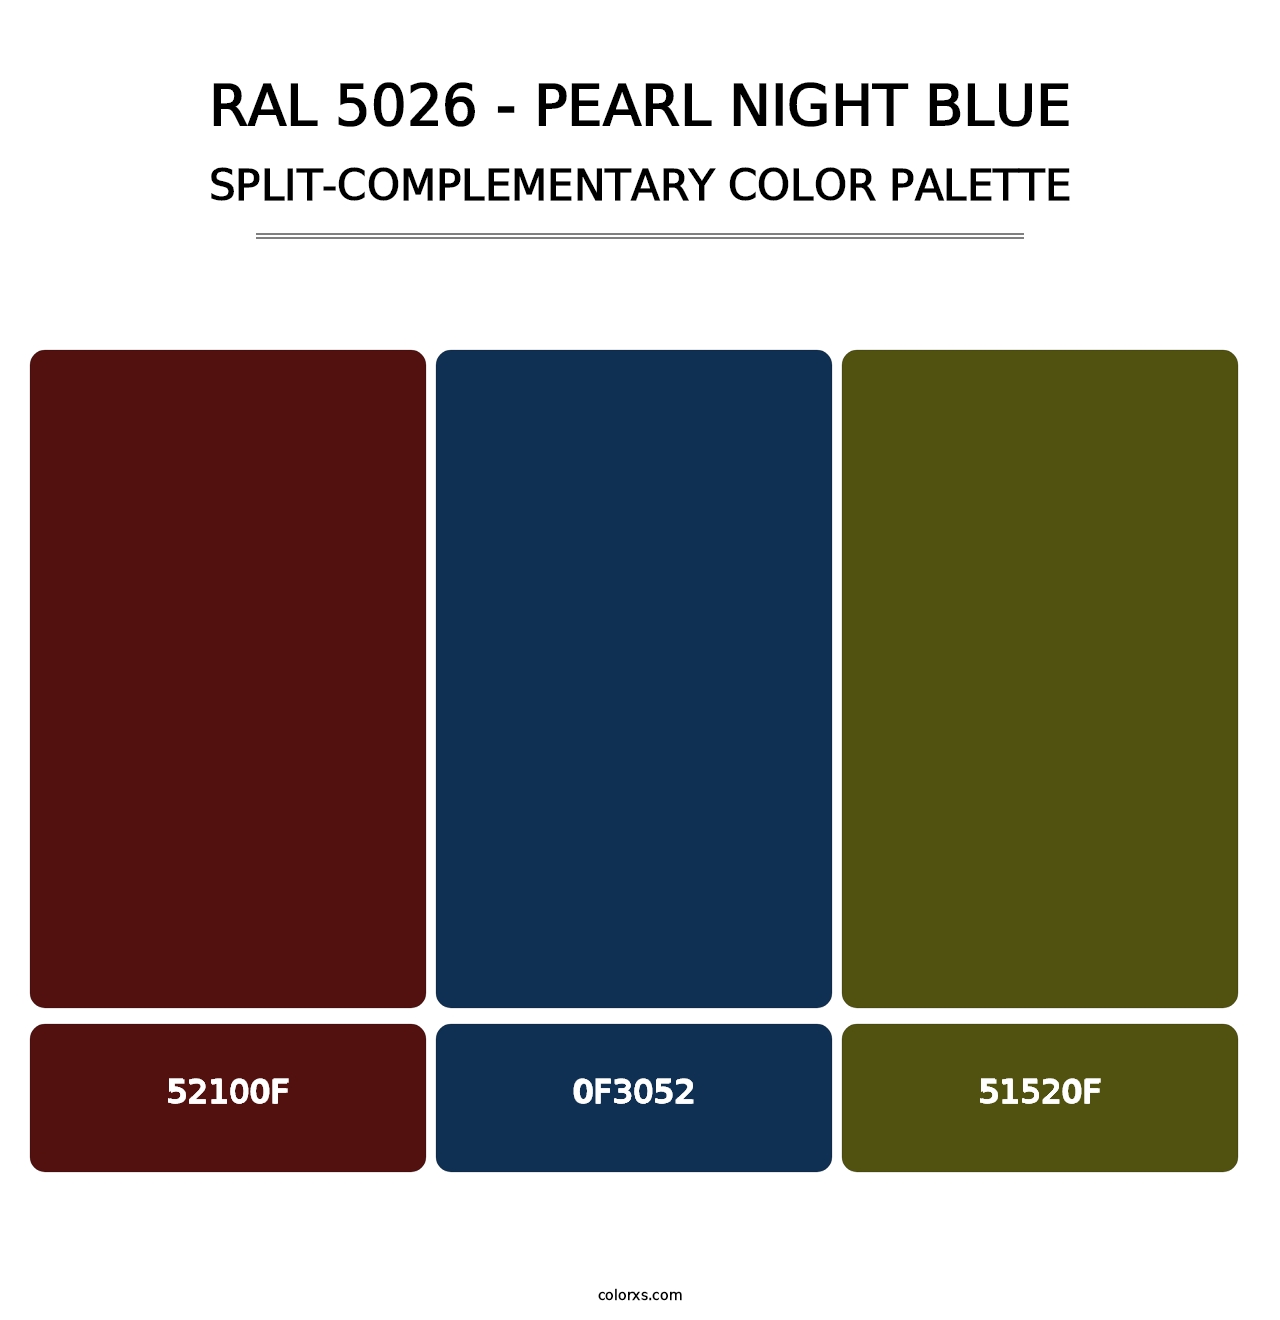 RAL 5026 - Pearl Night Blue - Split-Complementary Color Palette